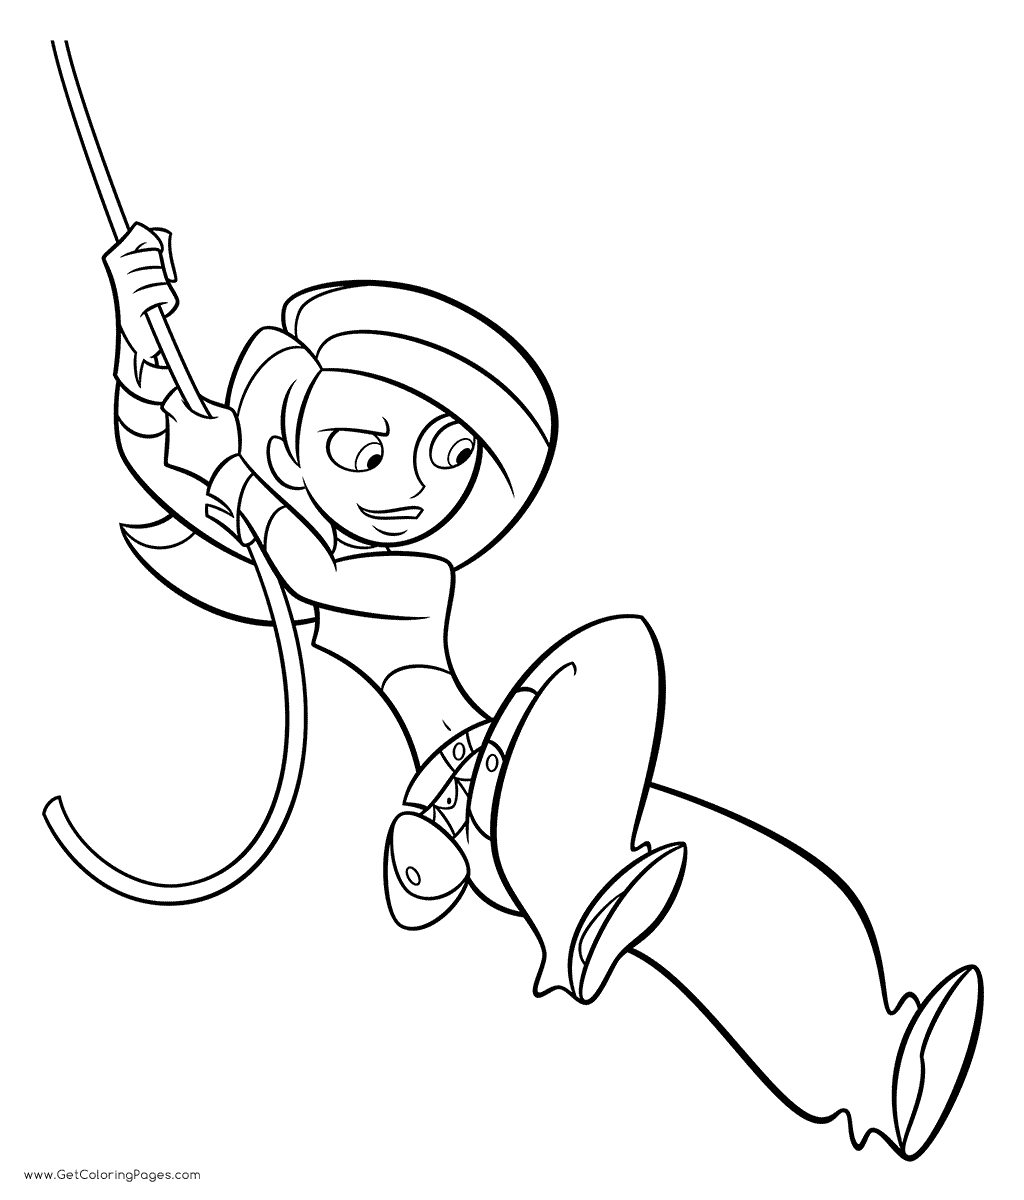 Kim Possible Swing on Rope Coloring Page